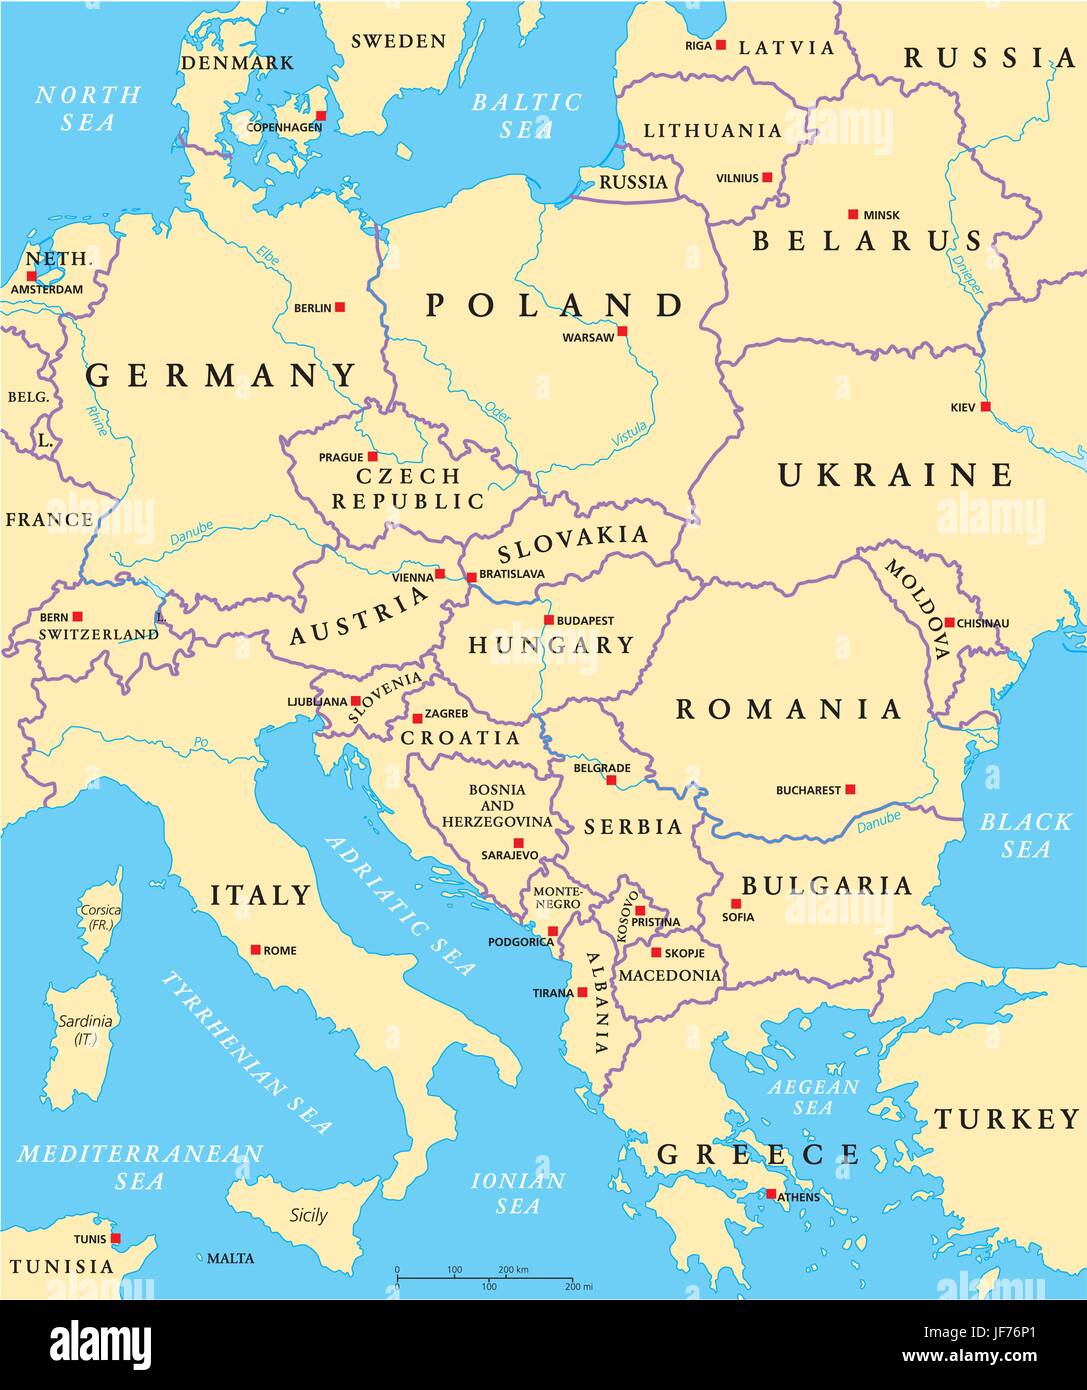 Central Europe And Northern Eurasia Political Map - United States Map